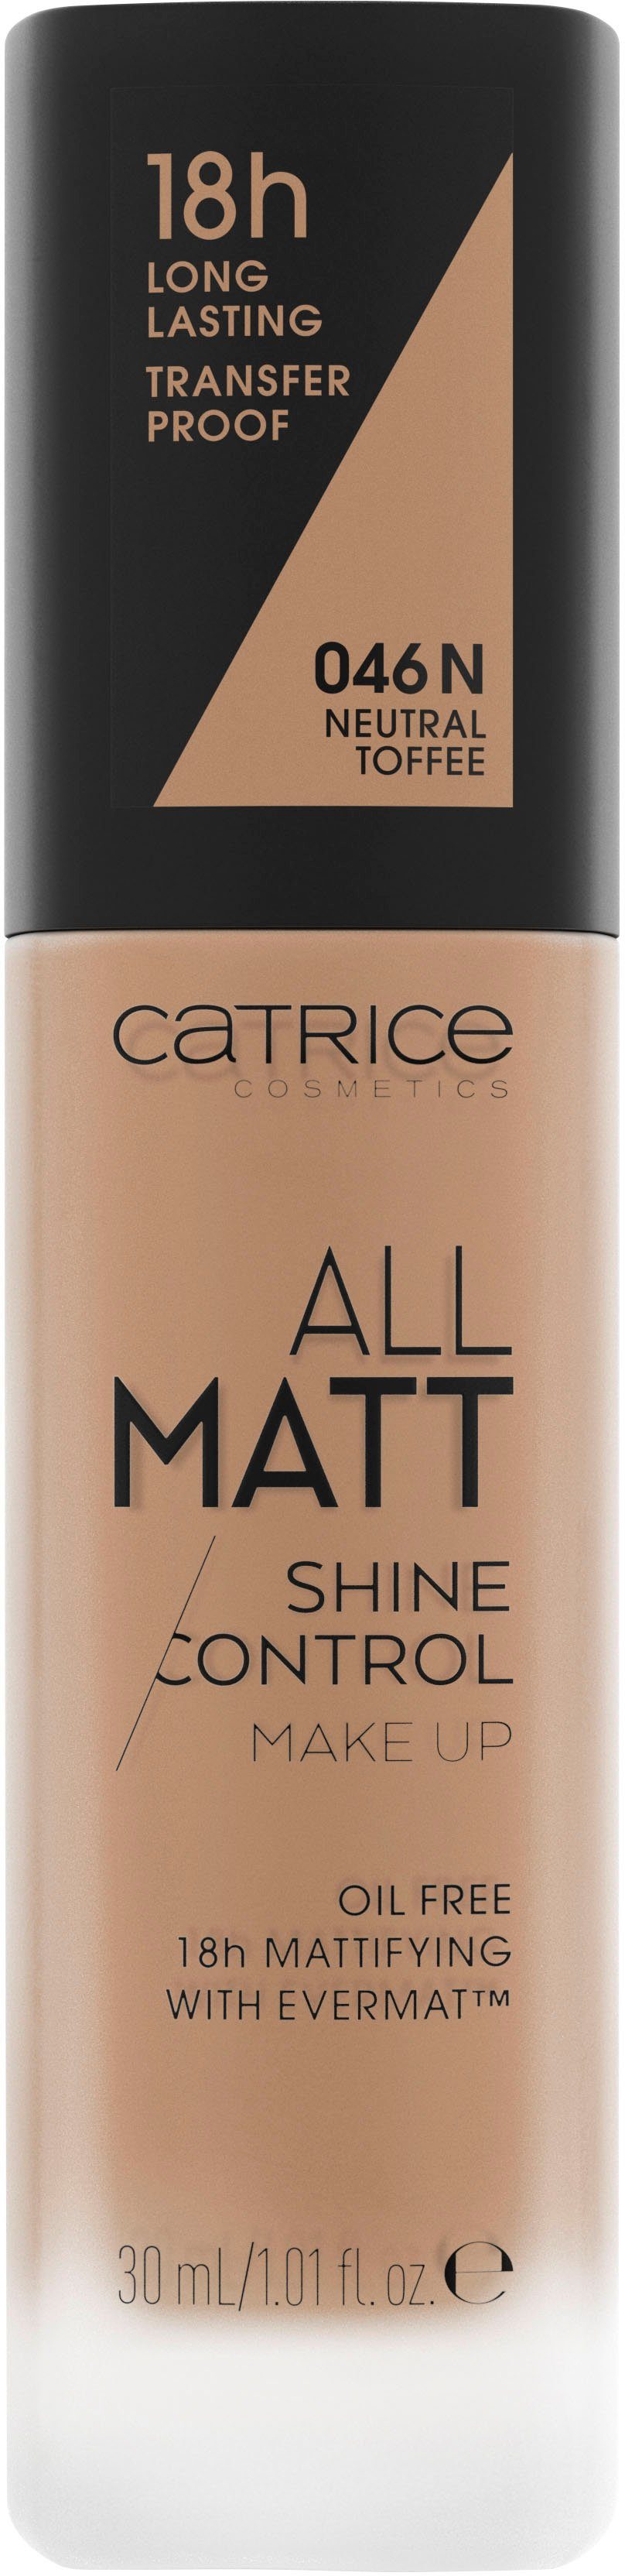 Catrice Foundation All Matt Shine Control Make Up Neutral Toffee